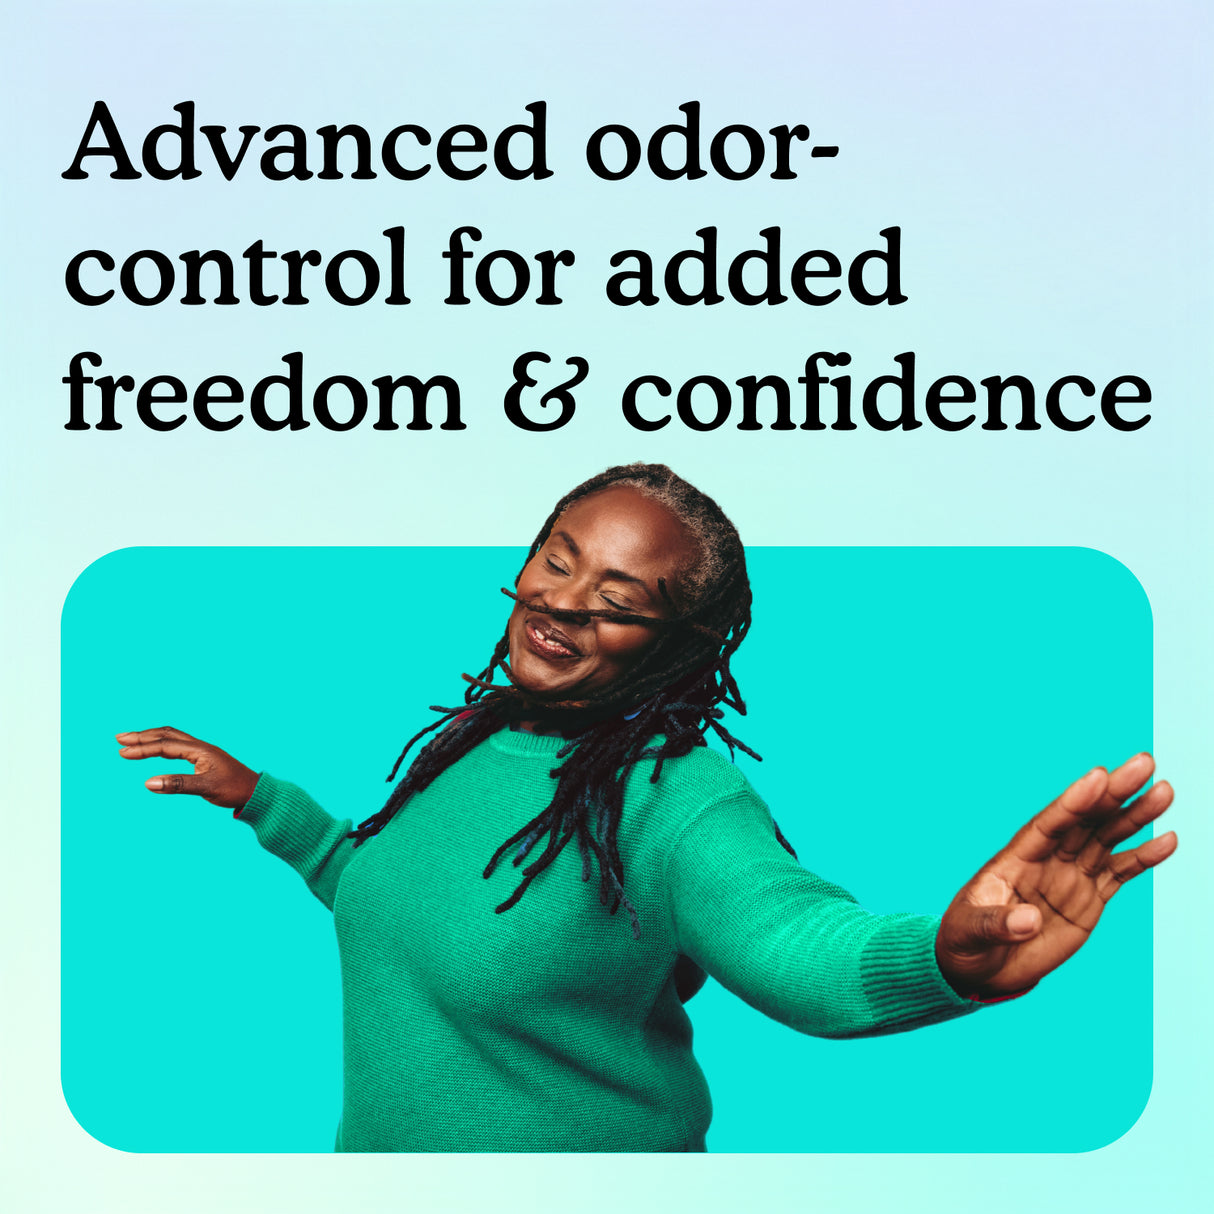 Advanced odor-control for added freedom & confidence